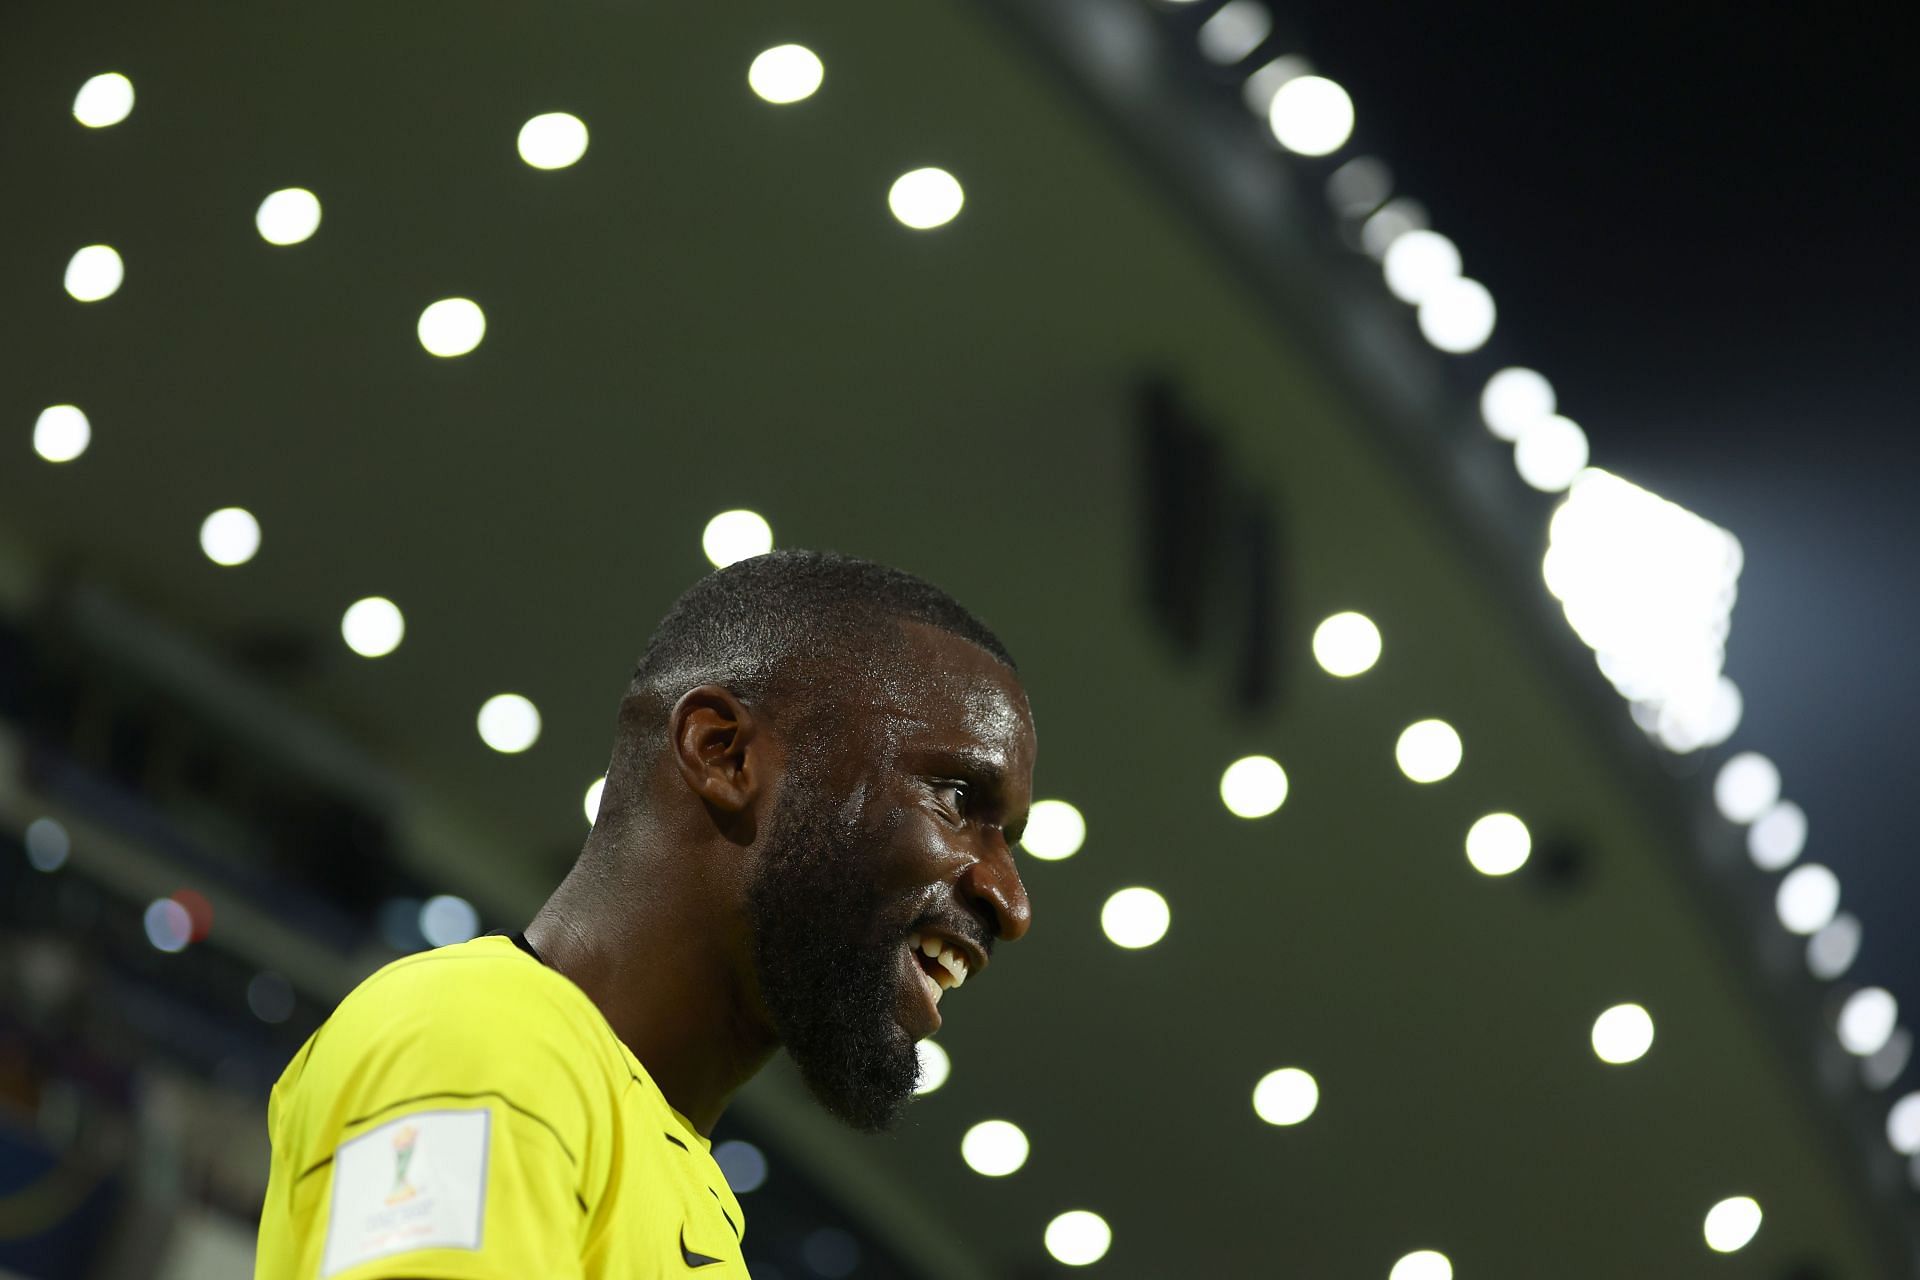 Antonio Rudiger is one of the mast likeable players in the game